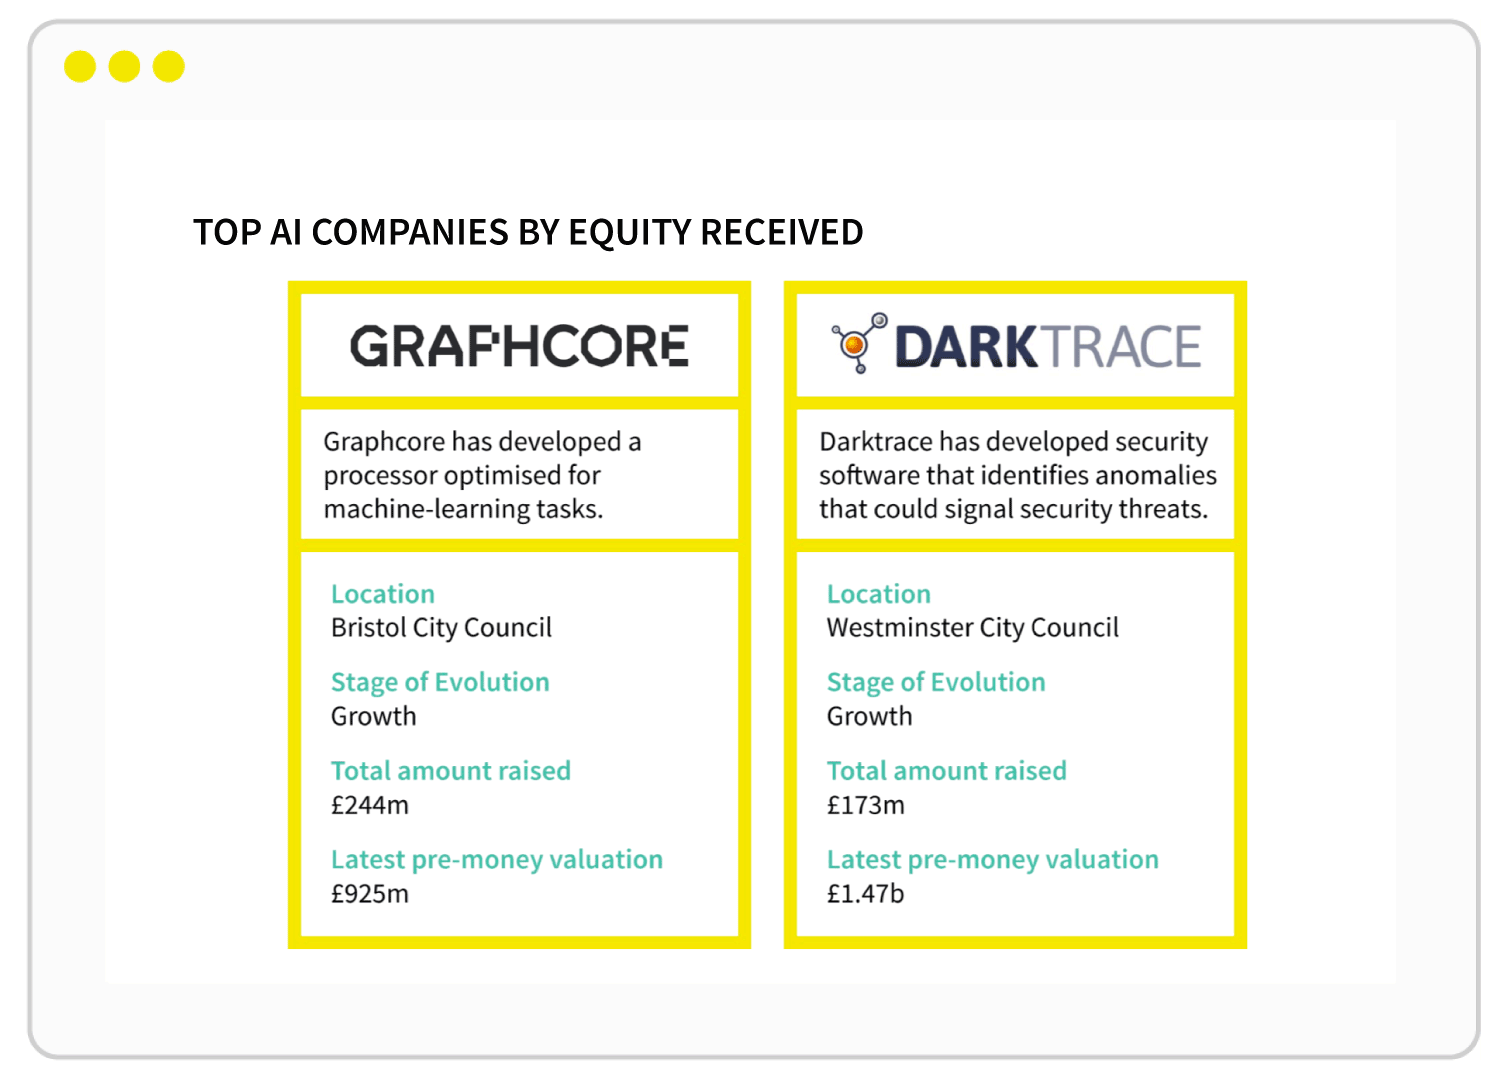 Top AI companies in the UK by amount of funding received